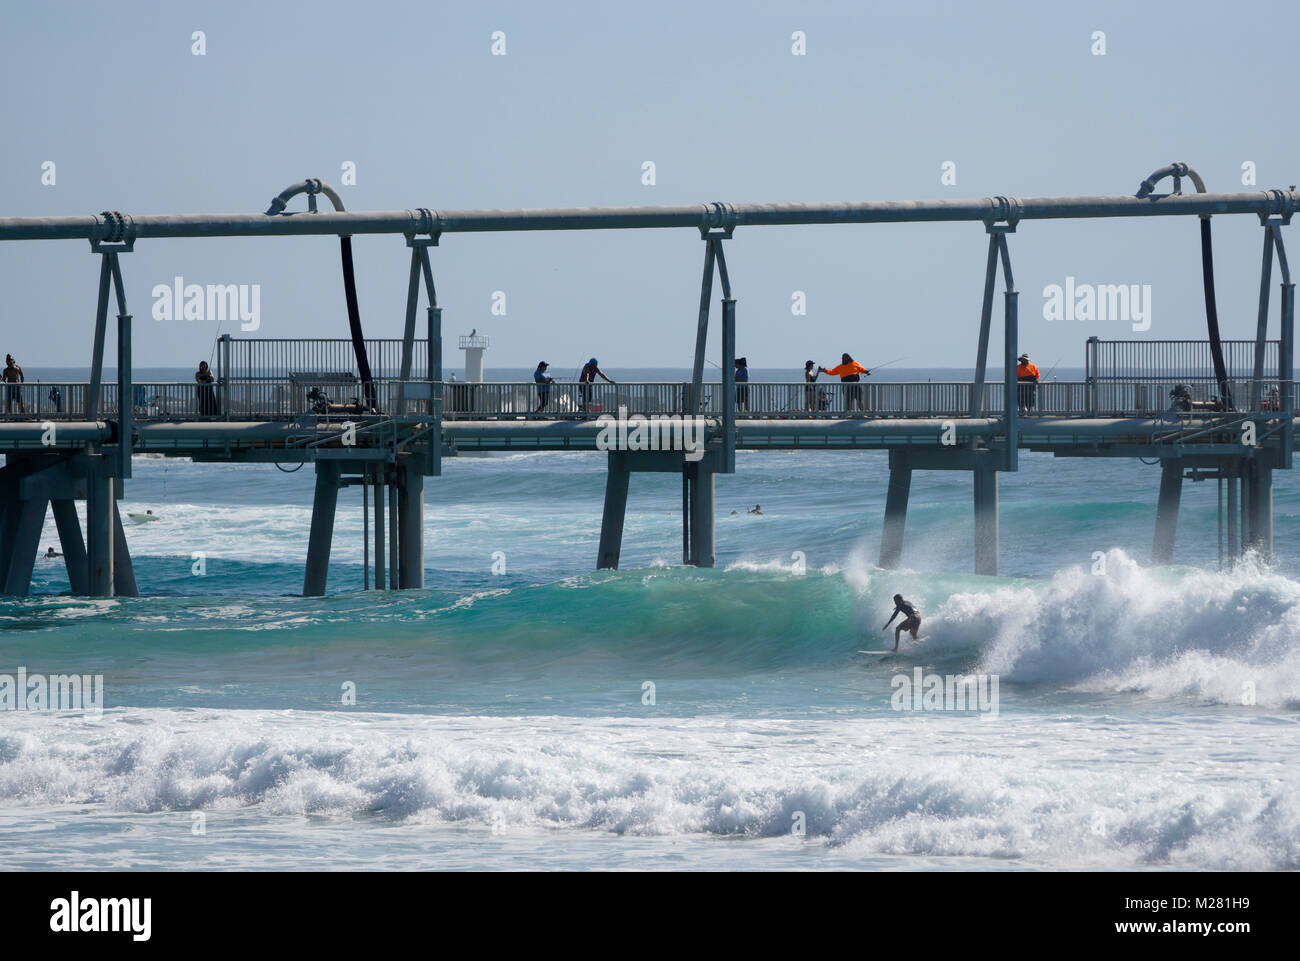 Surfing and fishing at The Spit, on the Gold Coast in Australia. Stock Photo